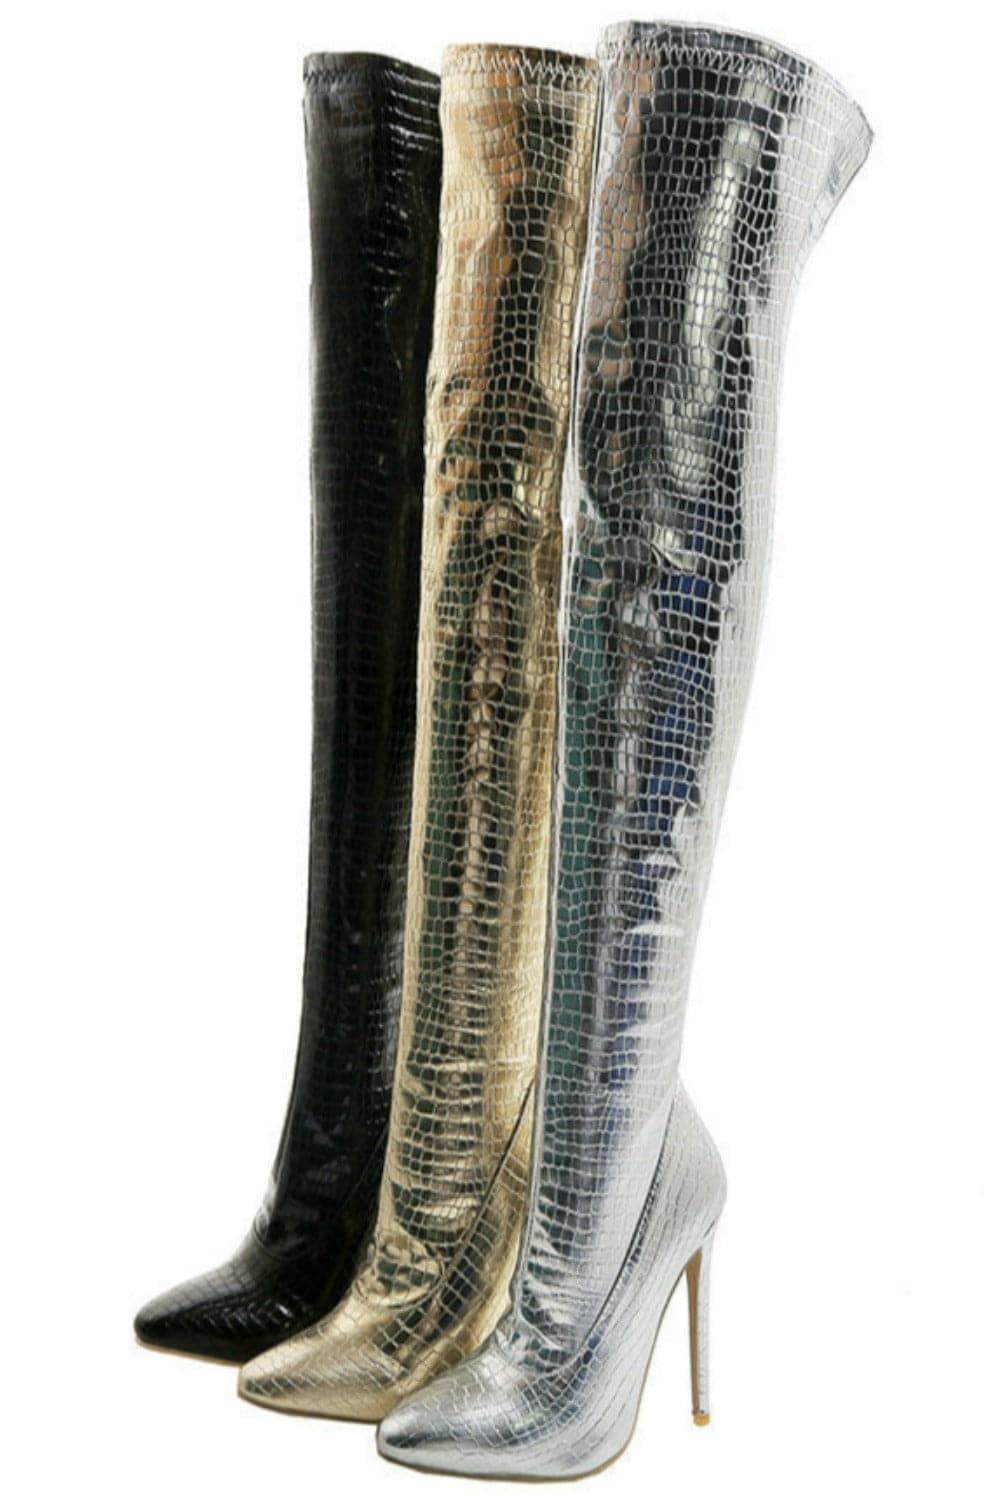 Ruby Metallic Knee High Gold Crocodile Boots - TGC Boutique - Gold Boots